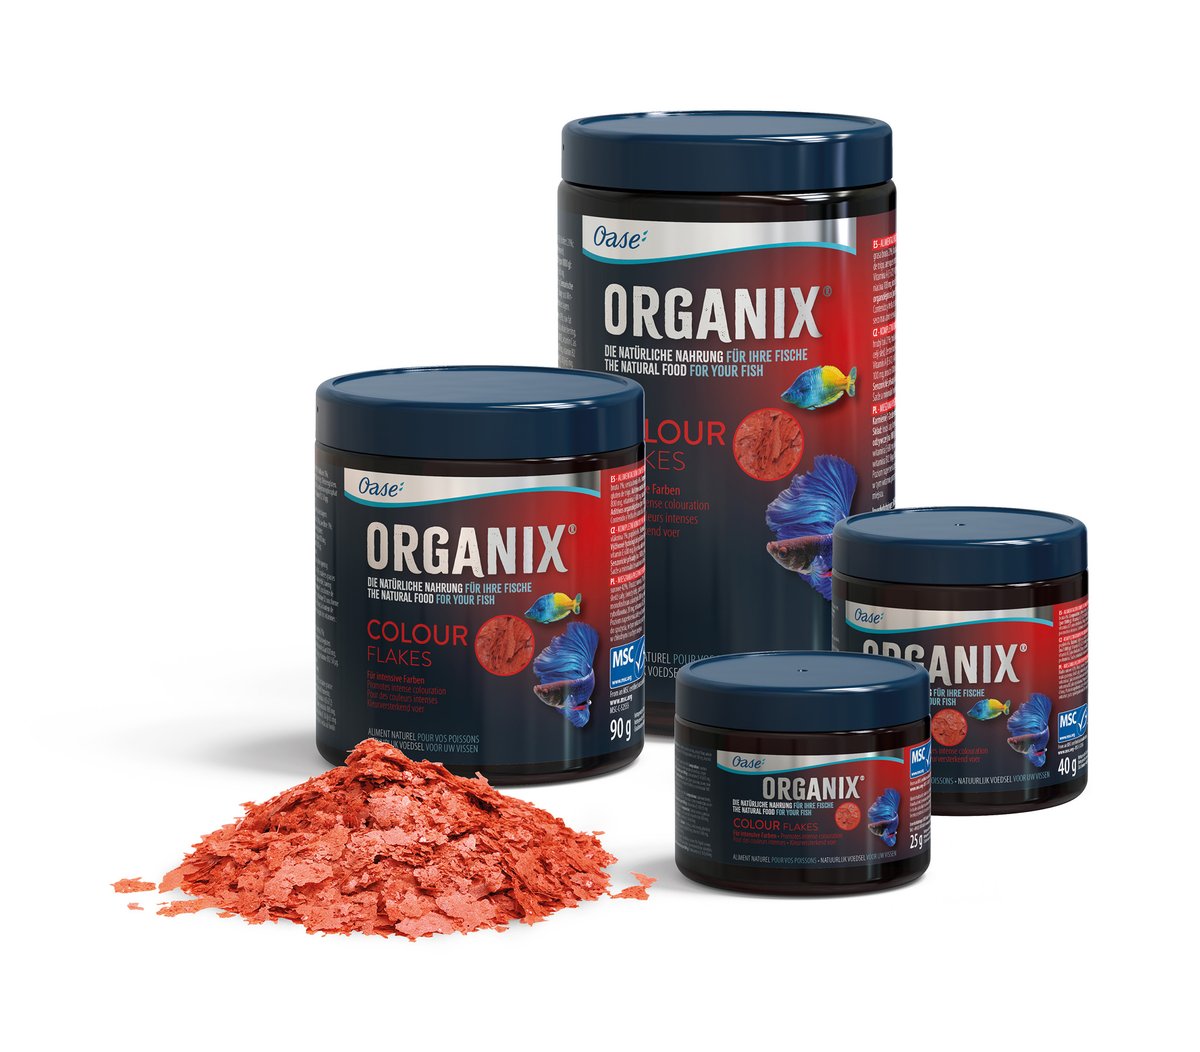 Our new OASE Organix Colour Flakes are crafted to help promote intense colouration in your fish. Try our MSC Certified natural food range today and pick up a pot from your nearest store: